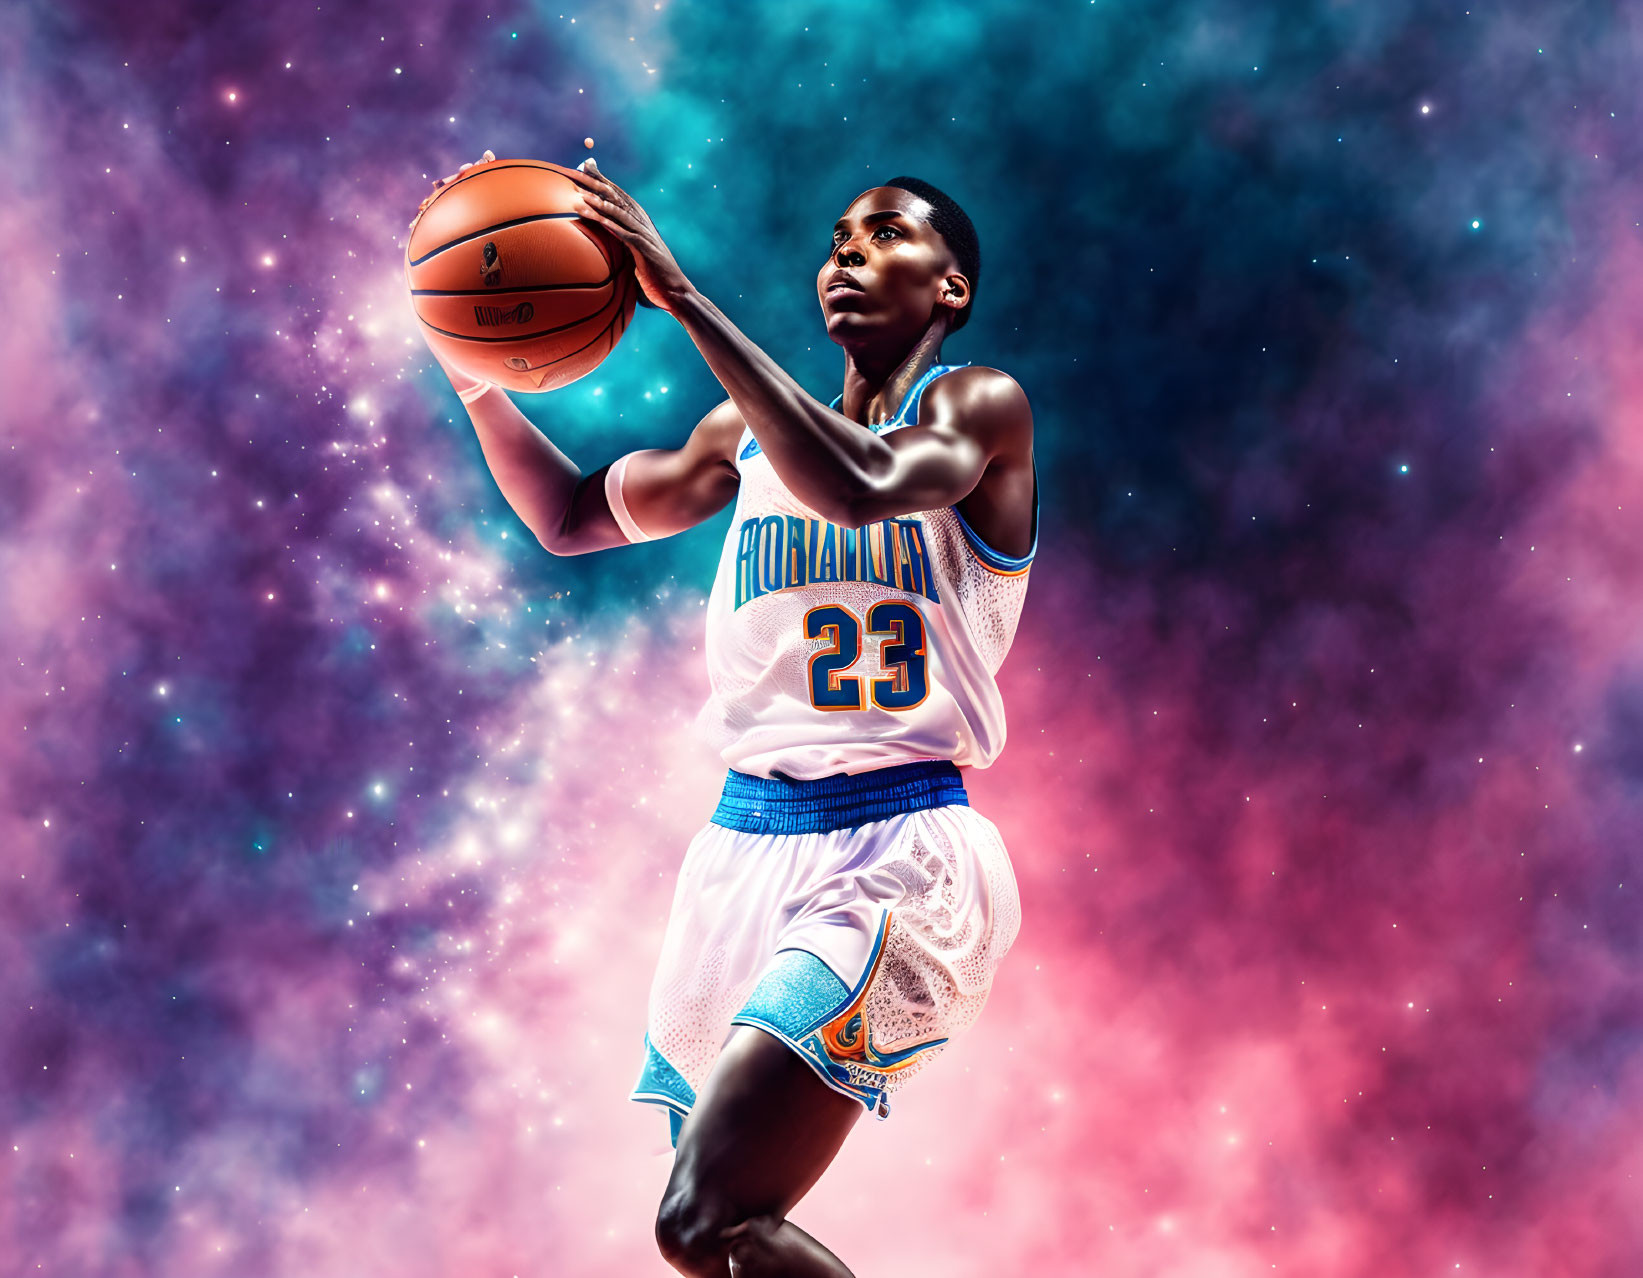 Basketball player shooting with cosmic starry background